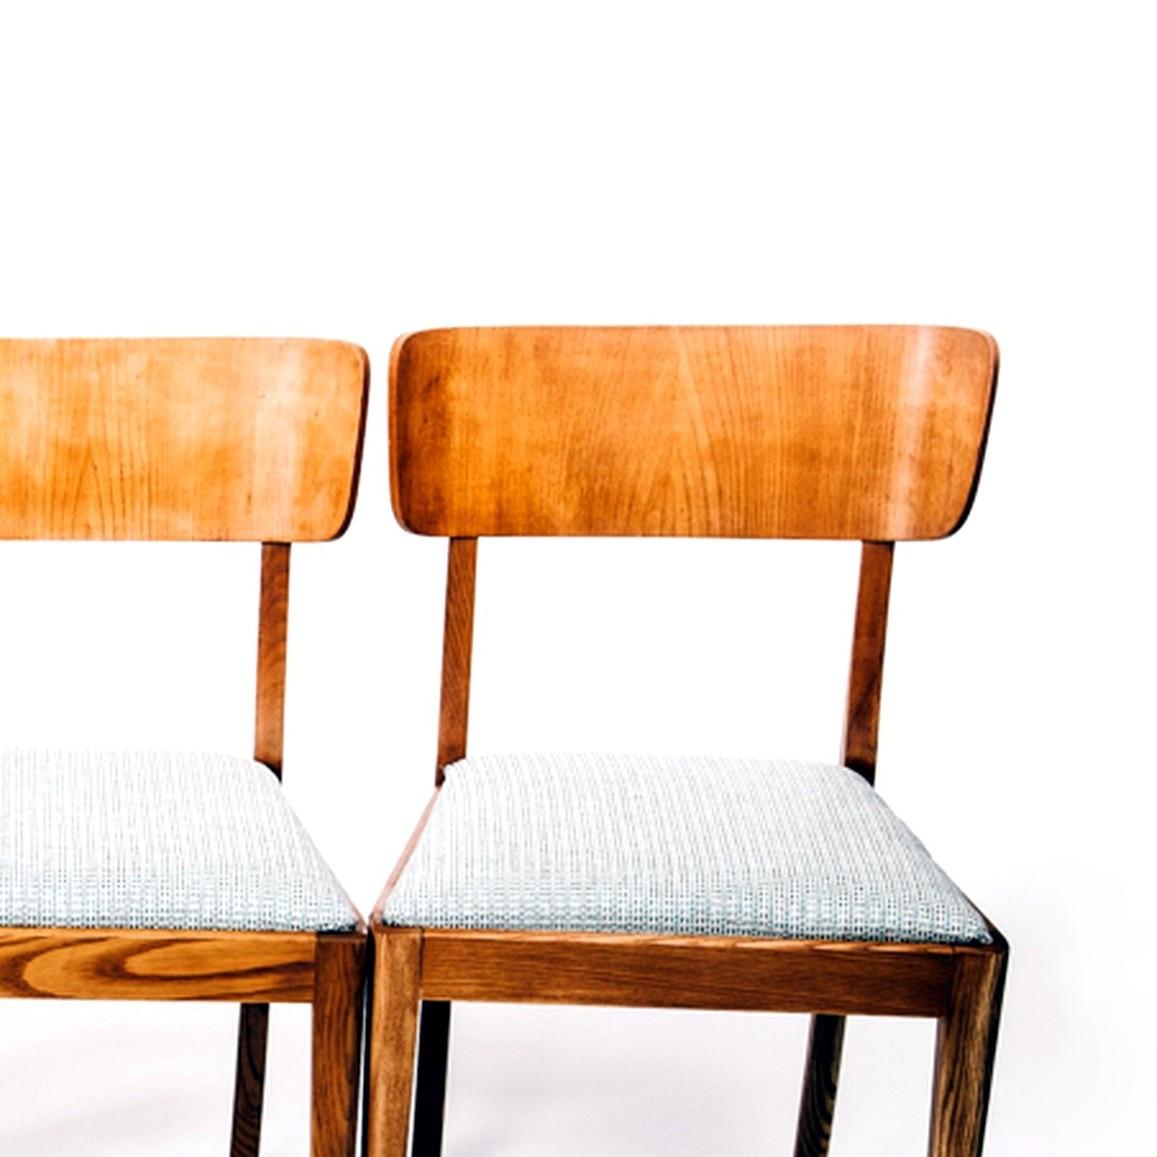 Time typical retro bevelled back seat chairs in teak. Fabric can easily be changed according to preference.